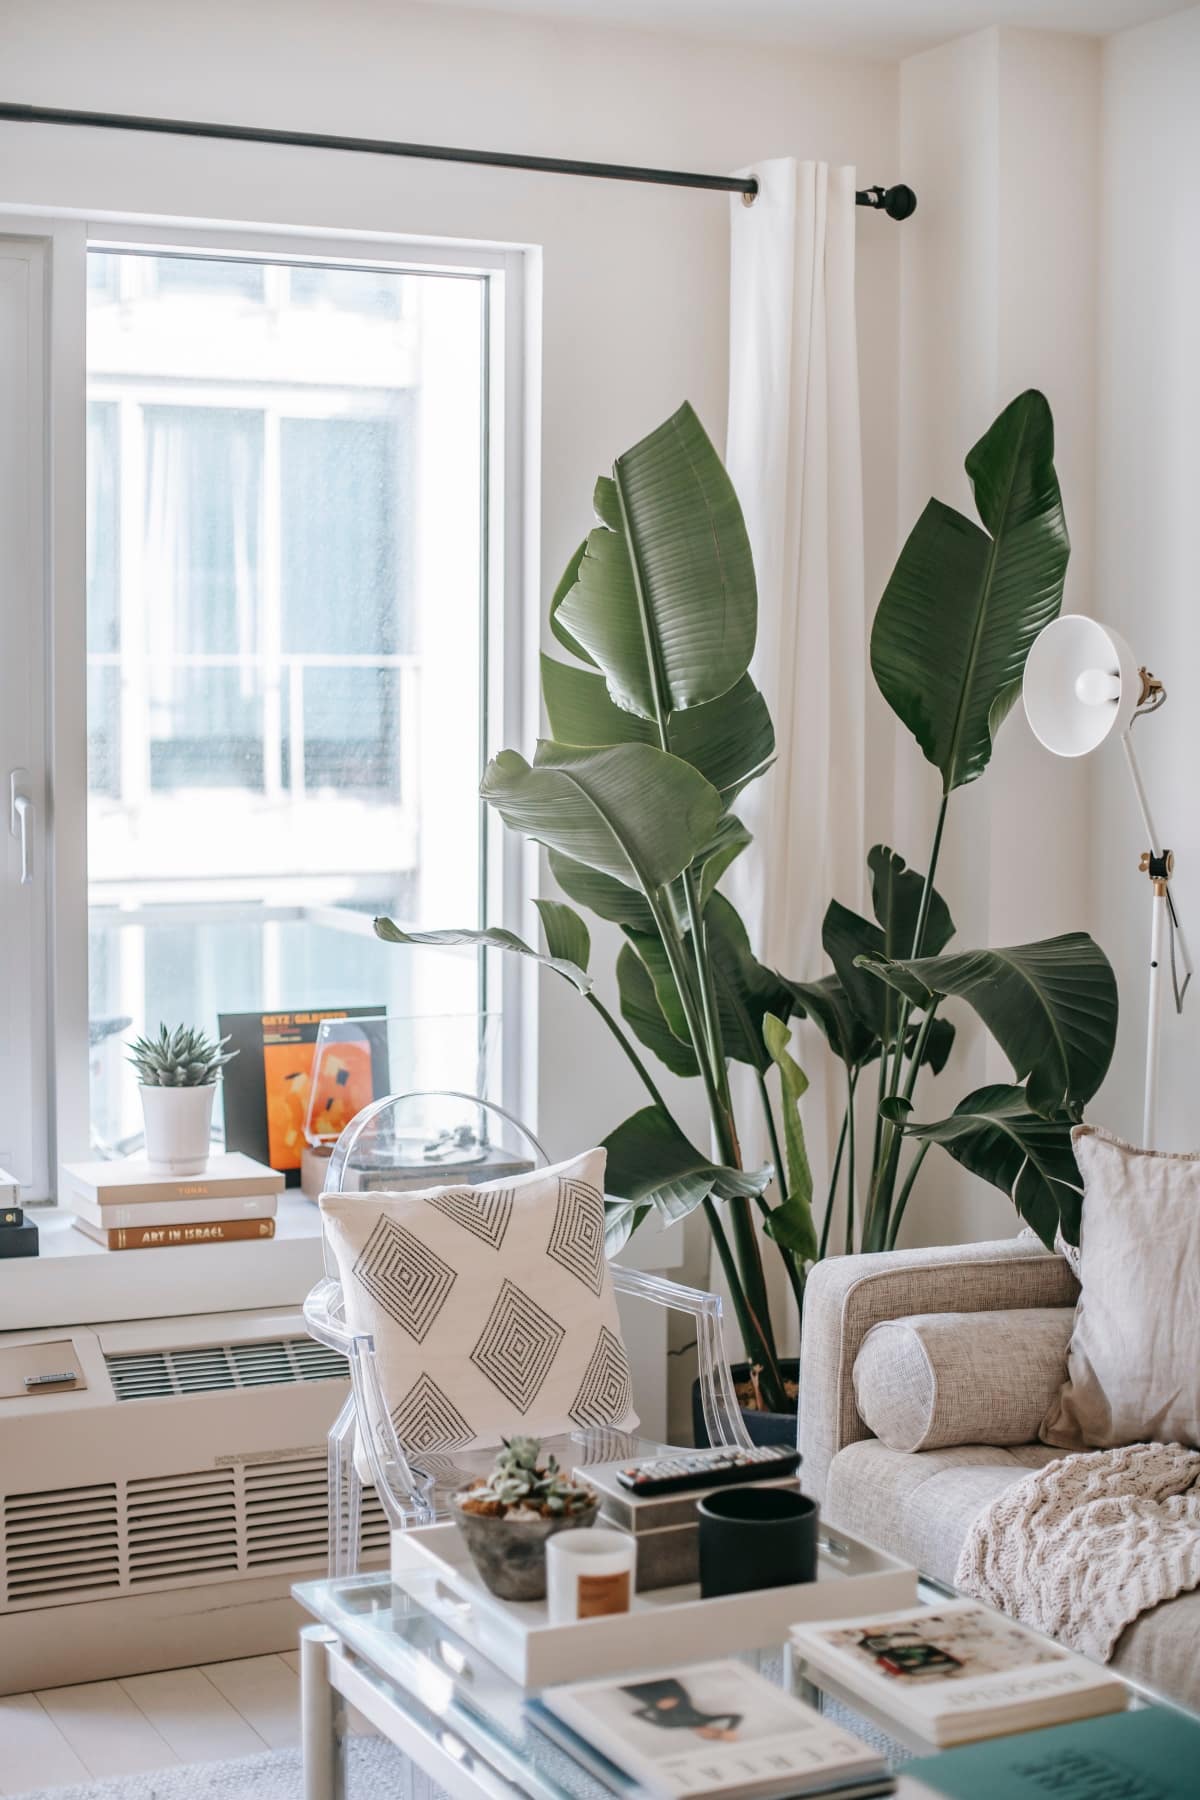 White living room with decorative plant and white framed windows